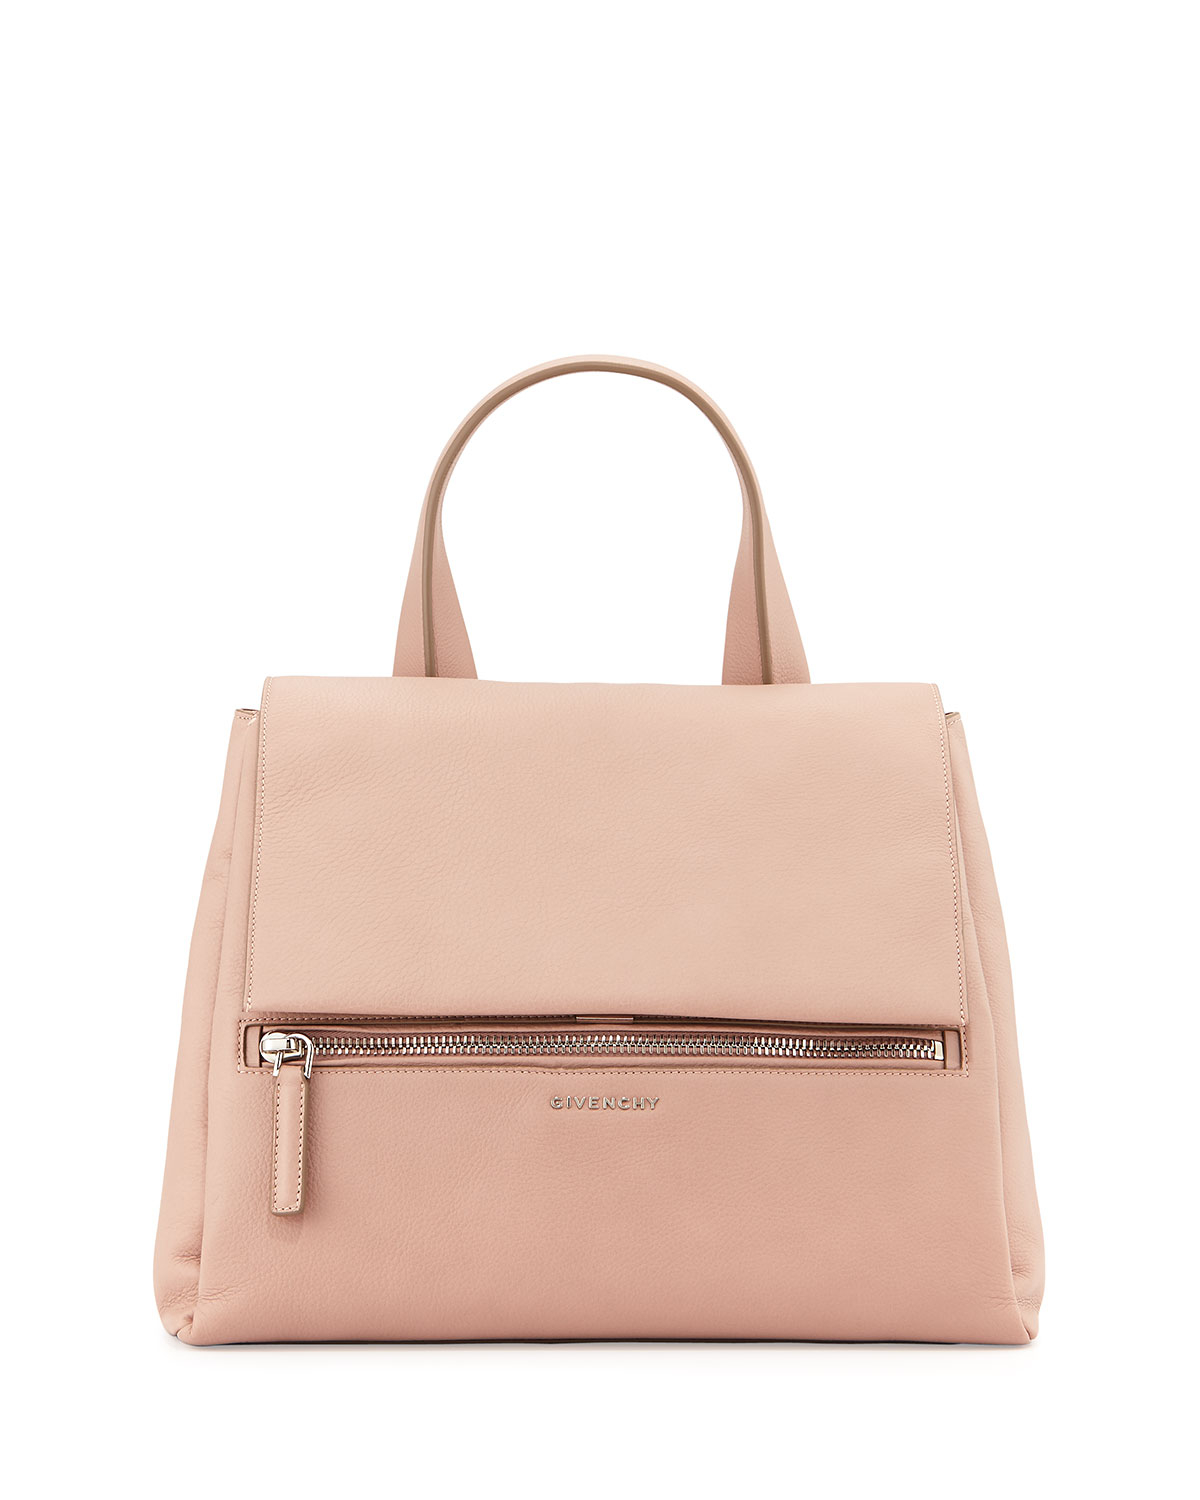 Givenchy Pandora Pure Leather Satchel Bag in Pink | Lyst